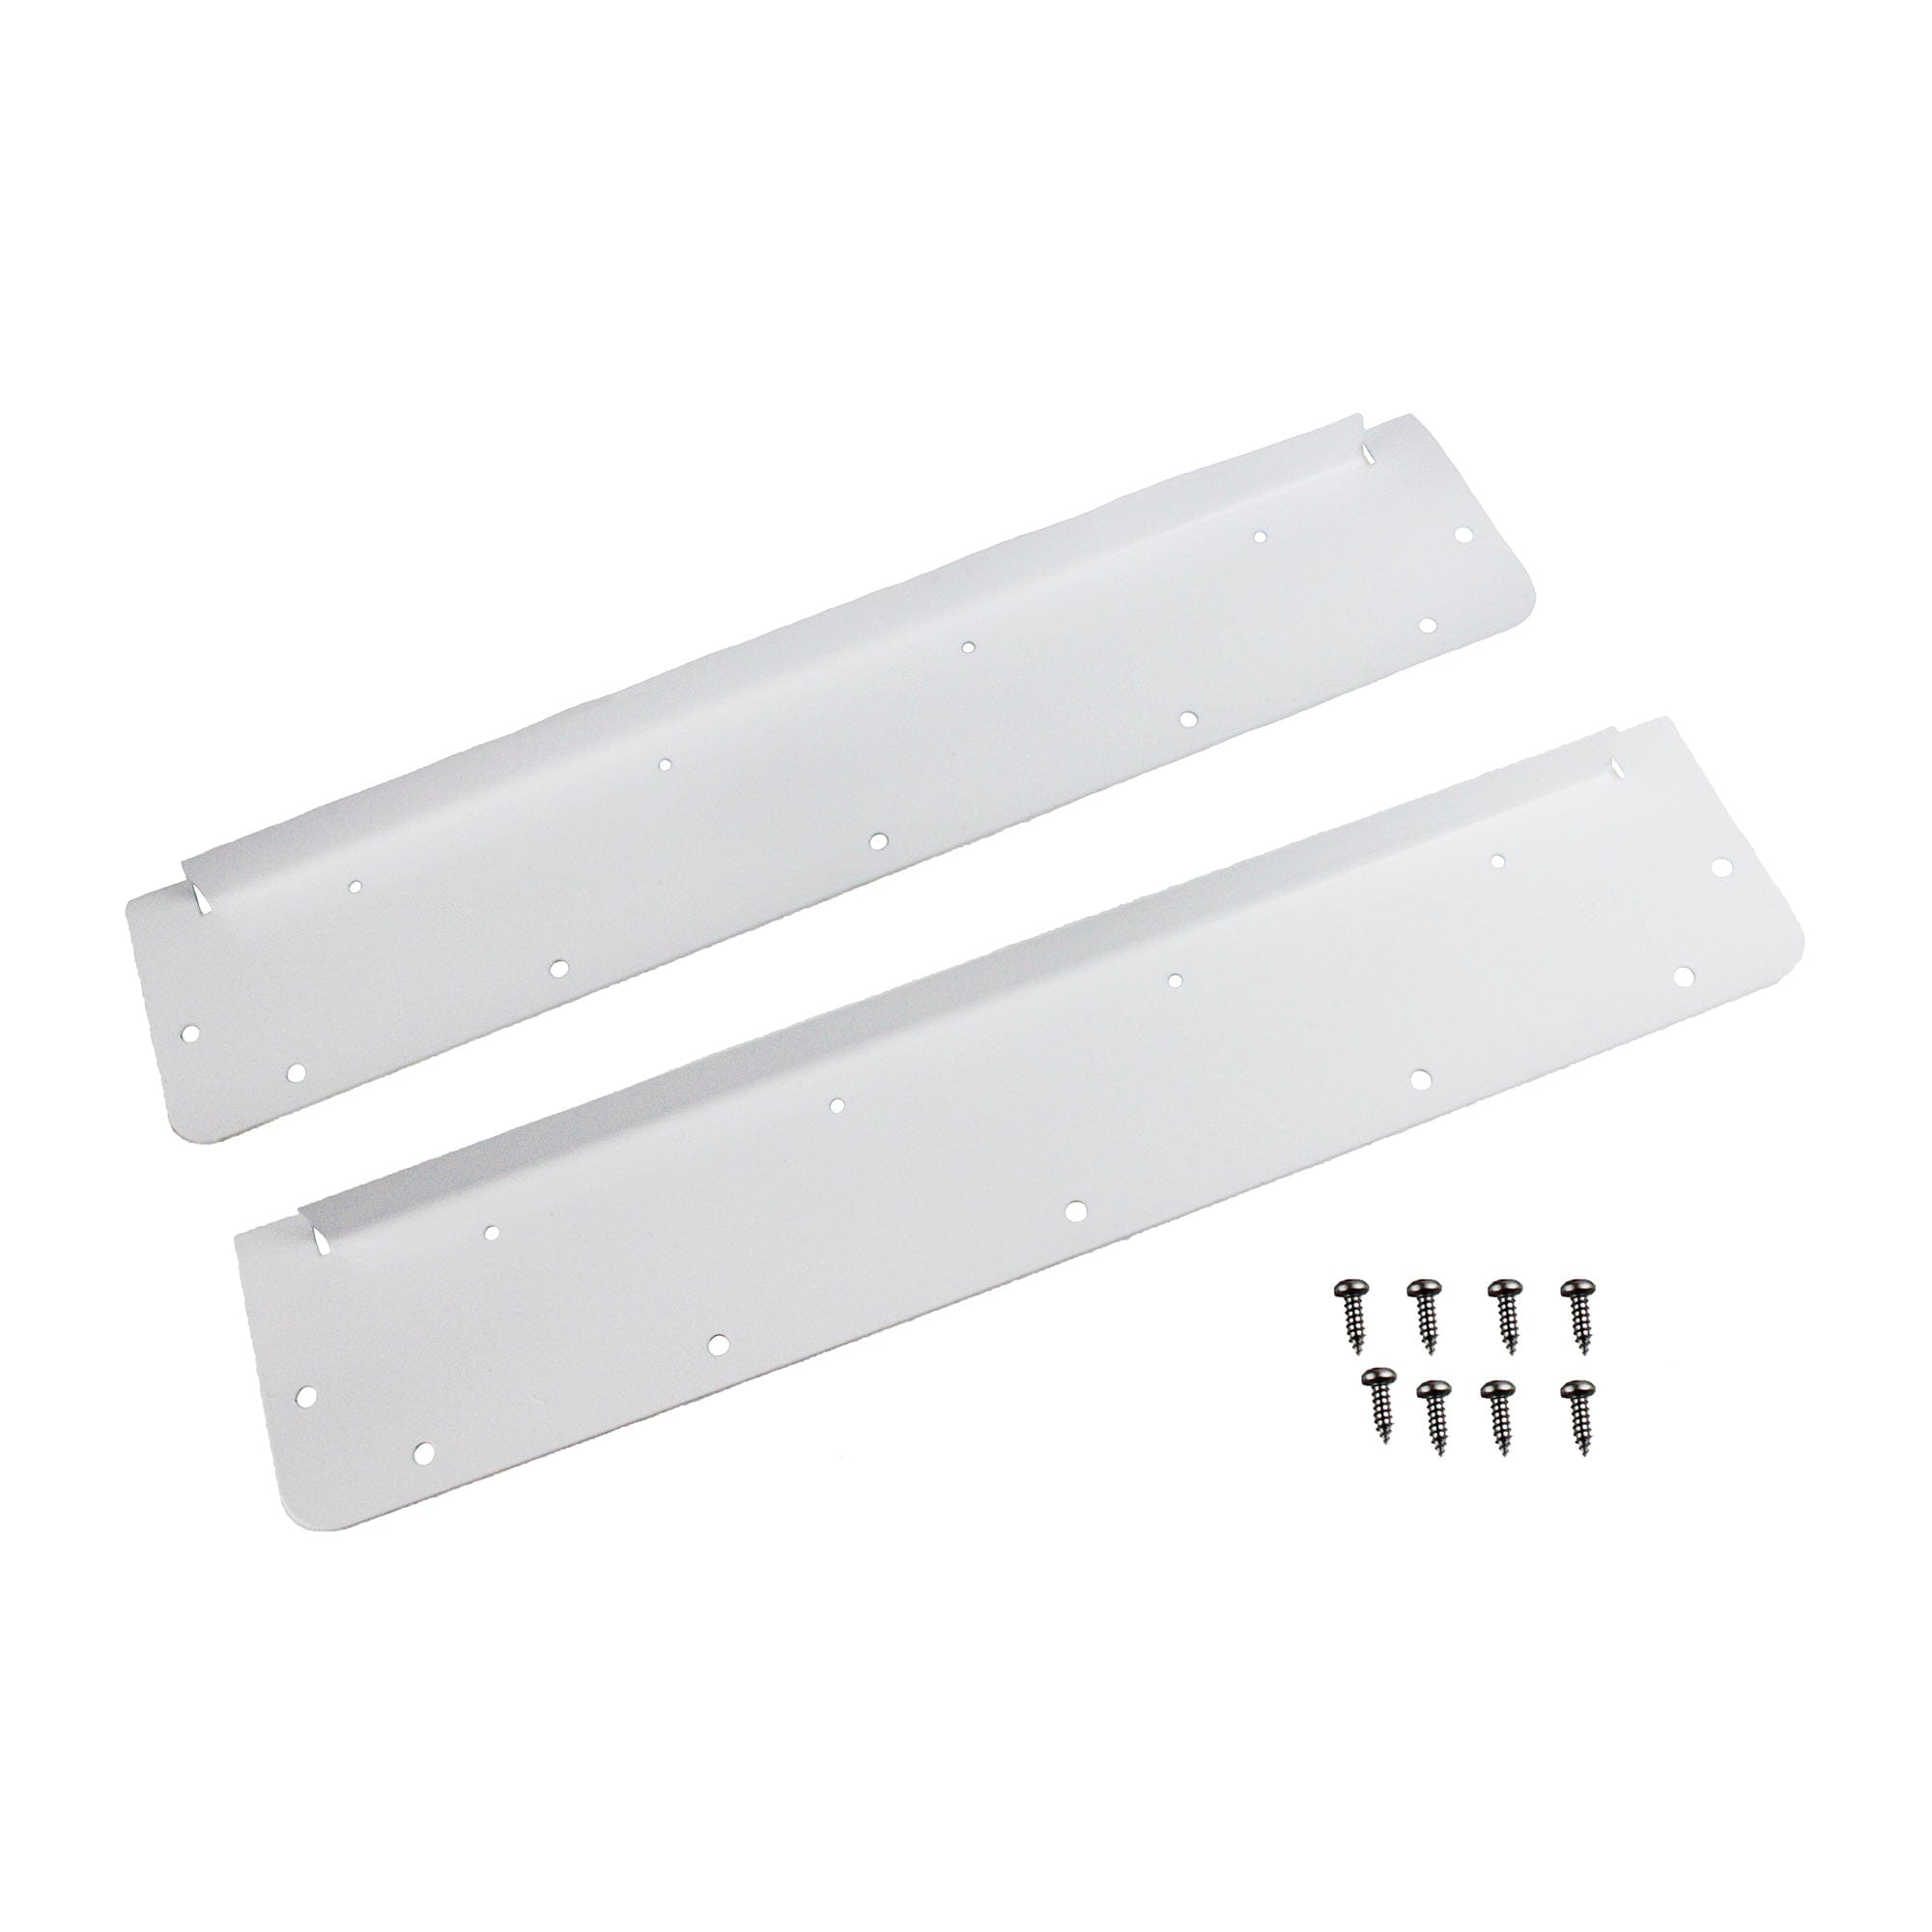 Dometic 94946 Water Heater Wide Double Latch Door Kit 6 Gallon White